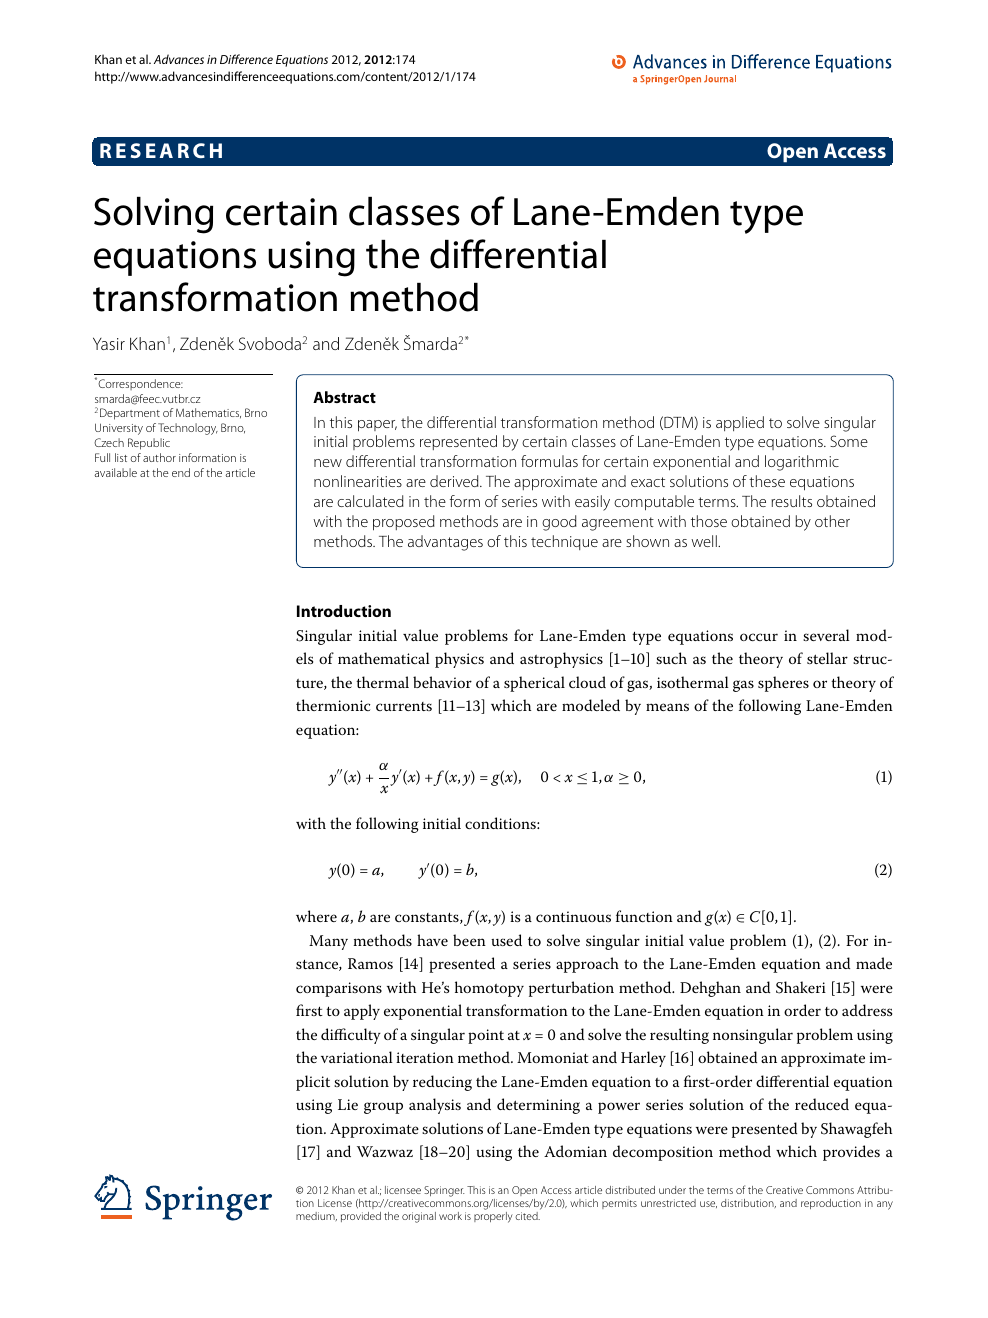 Solving Certain Classes Of Lane Emden Type Equations Using The Differential Transformation Method Topic Of Research Paper In Mathematics Download Scholarly Article Pdf And Read For Free On Cyberleninka Open Science Hub